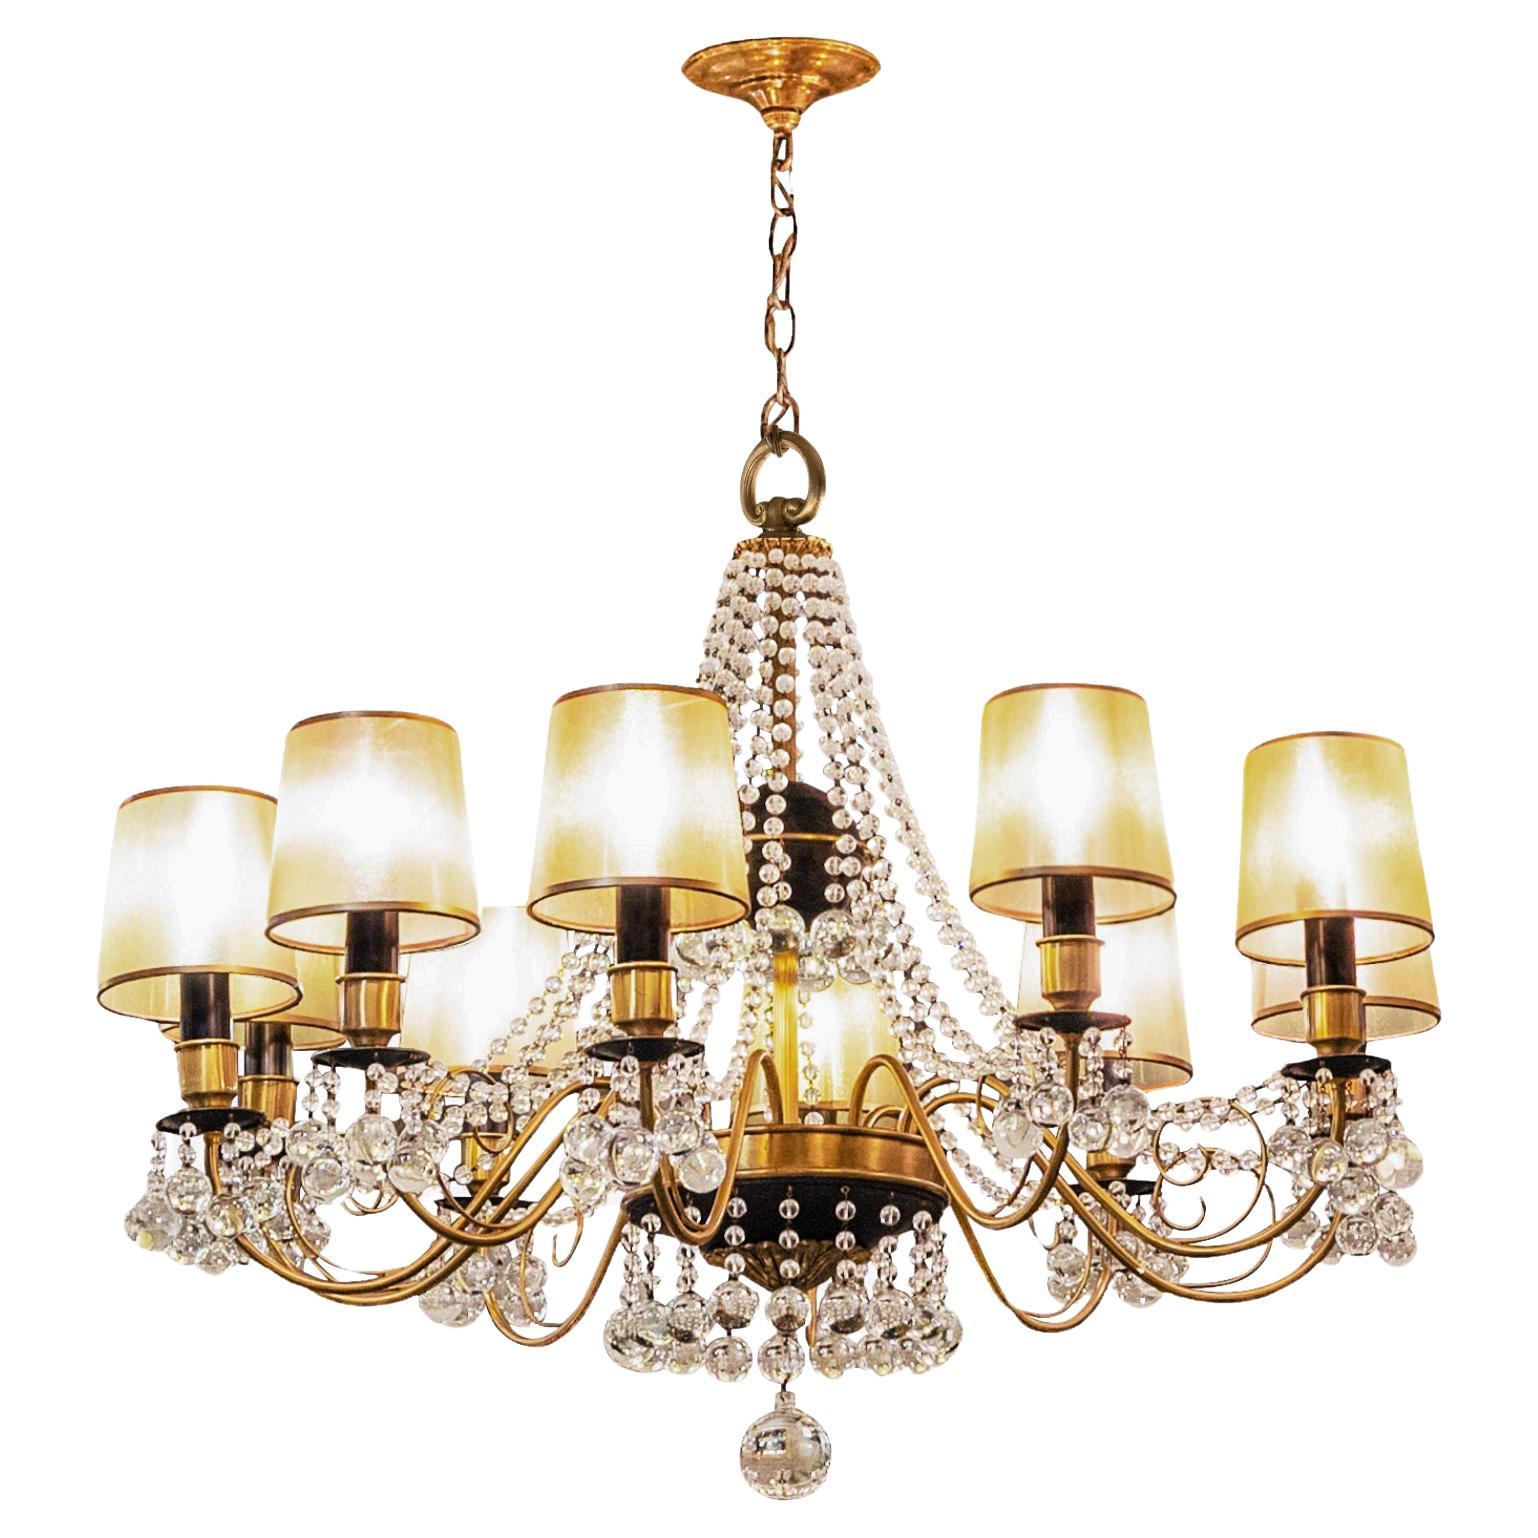 Tommi Parzinger Attributed Elegant 10 Arm Chandelier with Crystals 1950s For Sale